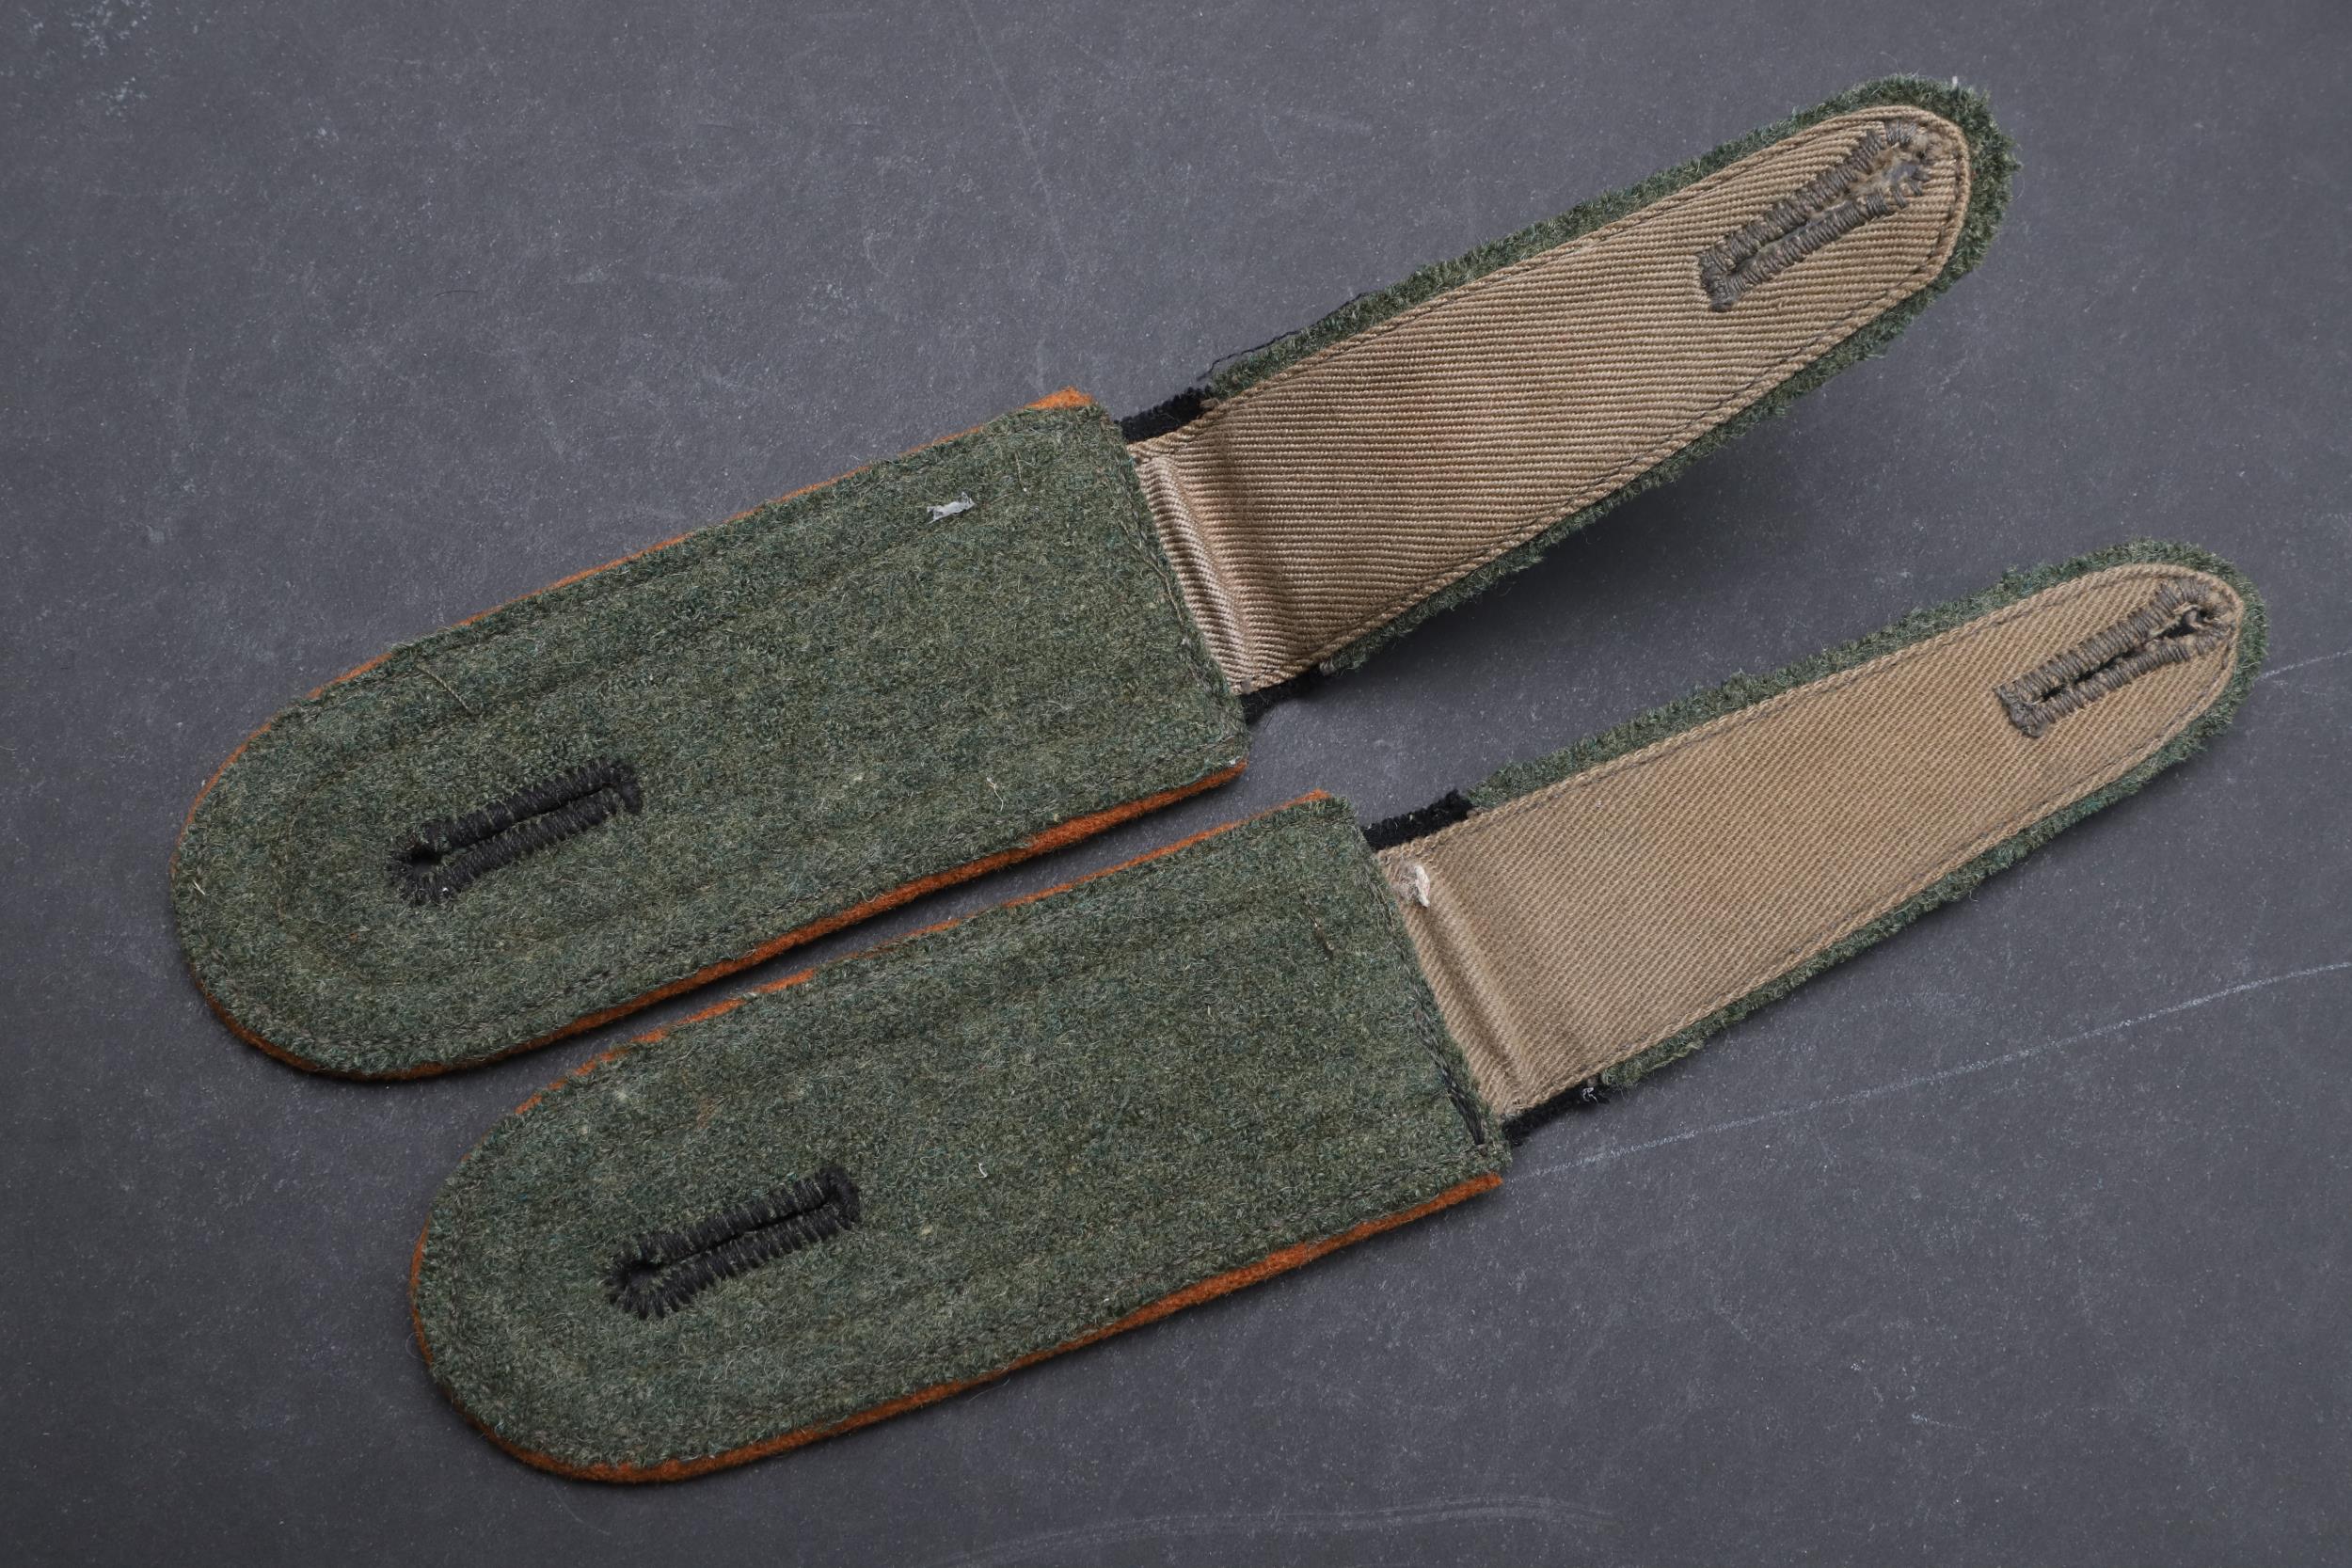 A PAIR OF SECOND WORLD WAR GERMAN WAFFEN-SS NCO'S SHOULDER STRAPS. - Image 4 of 4